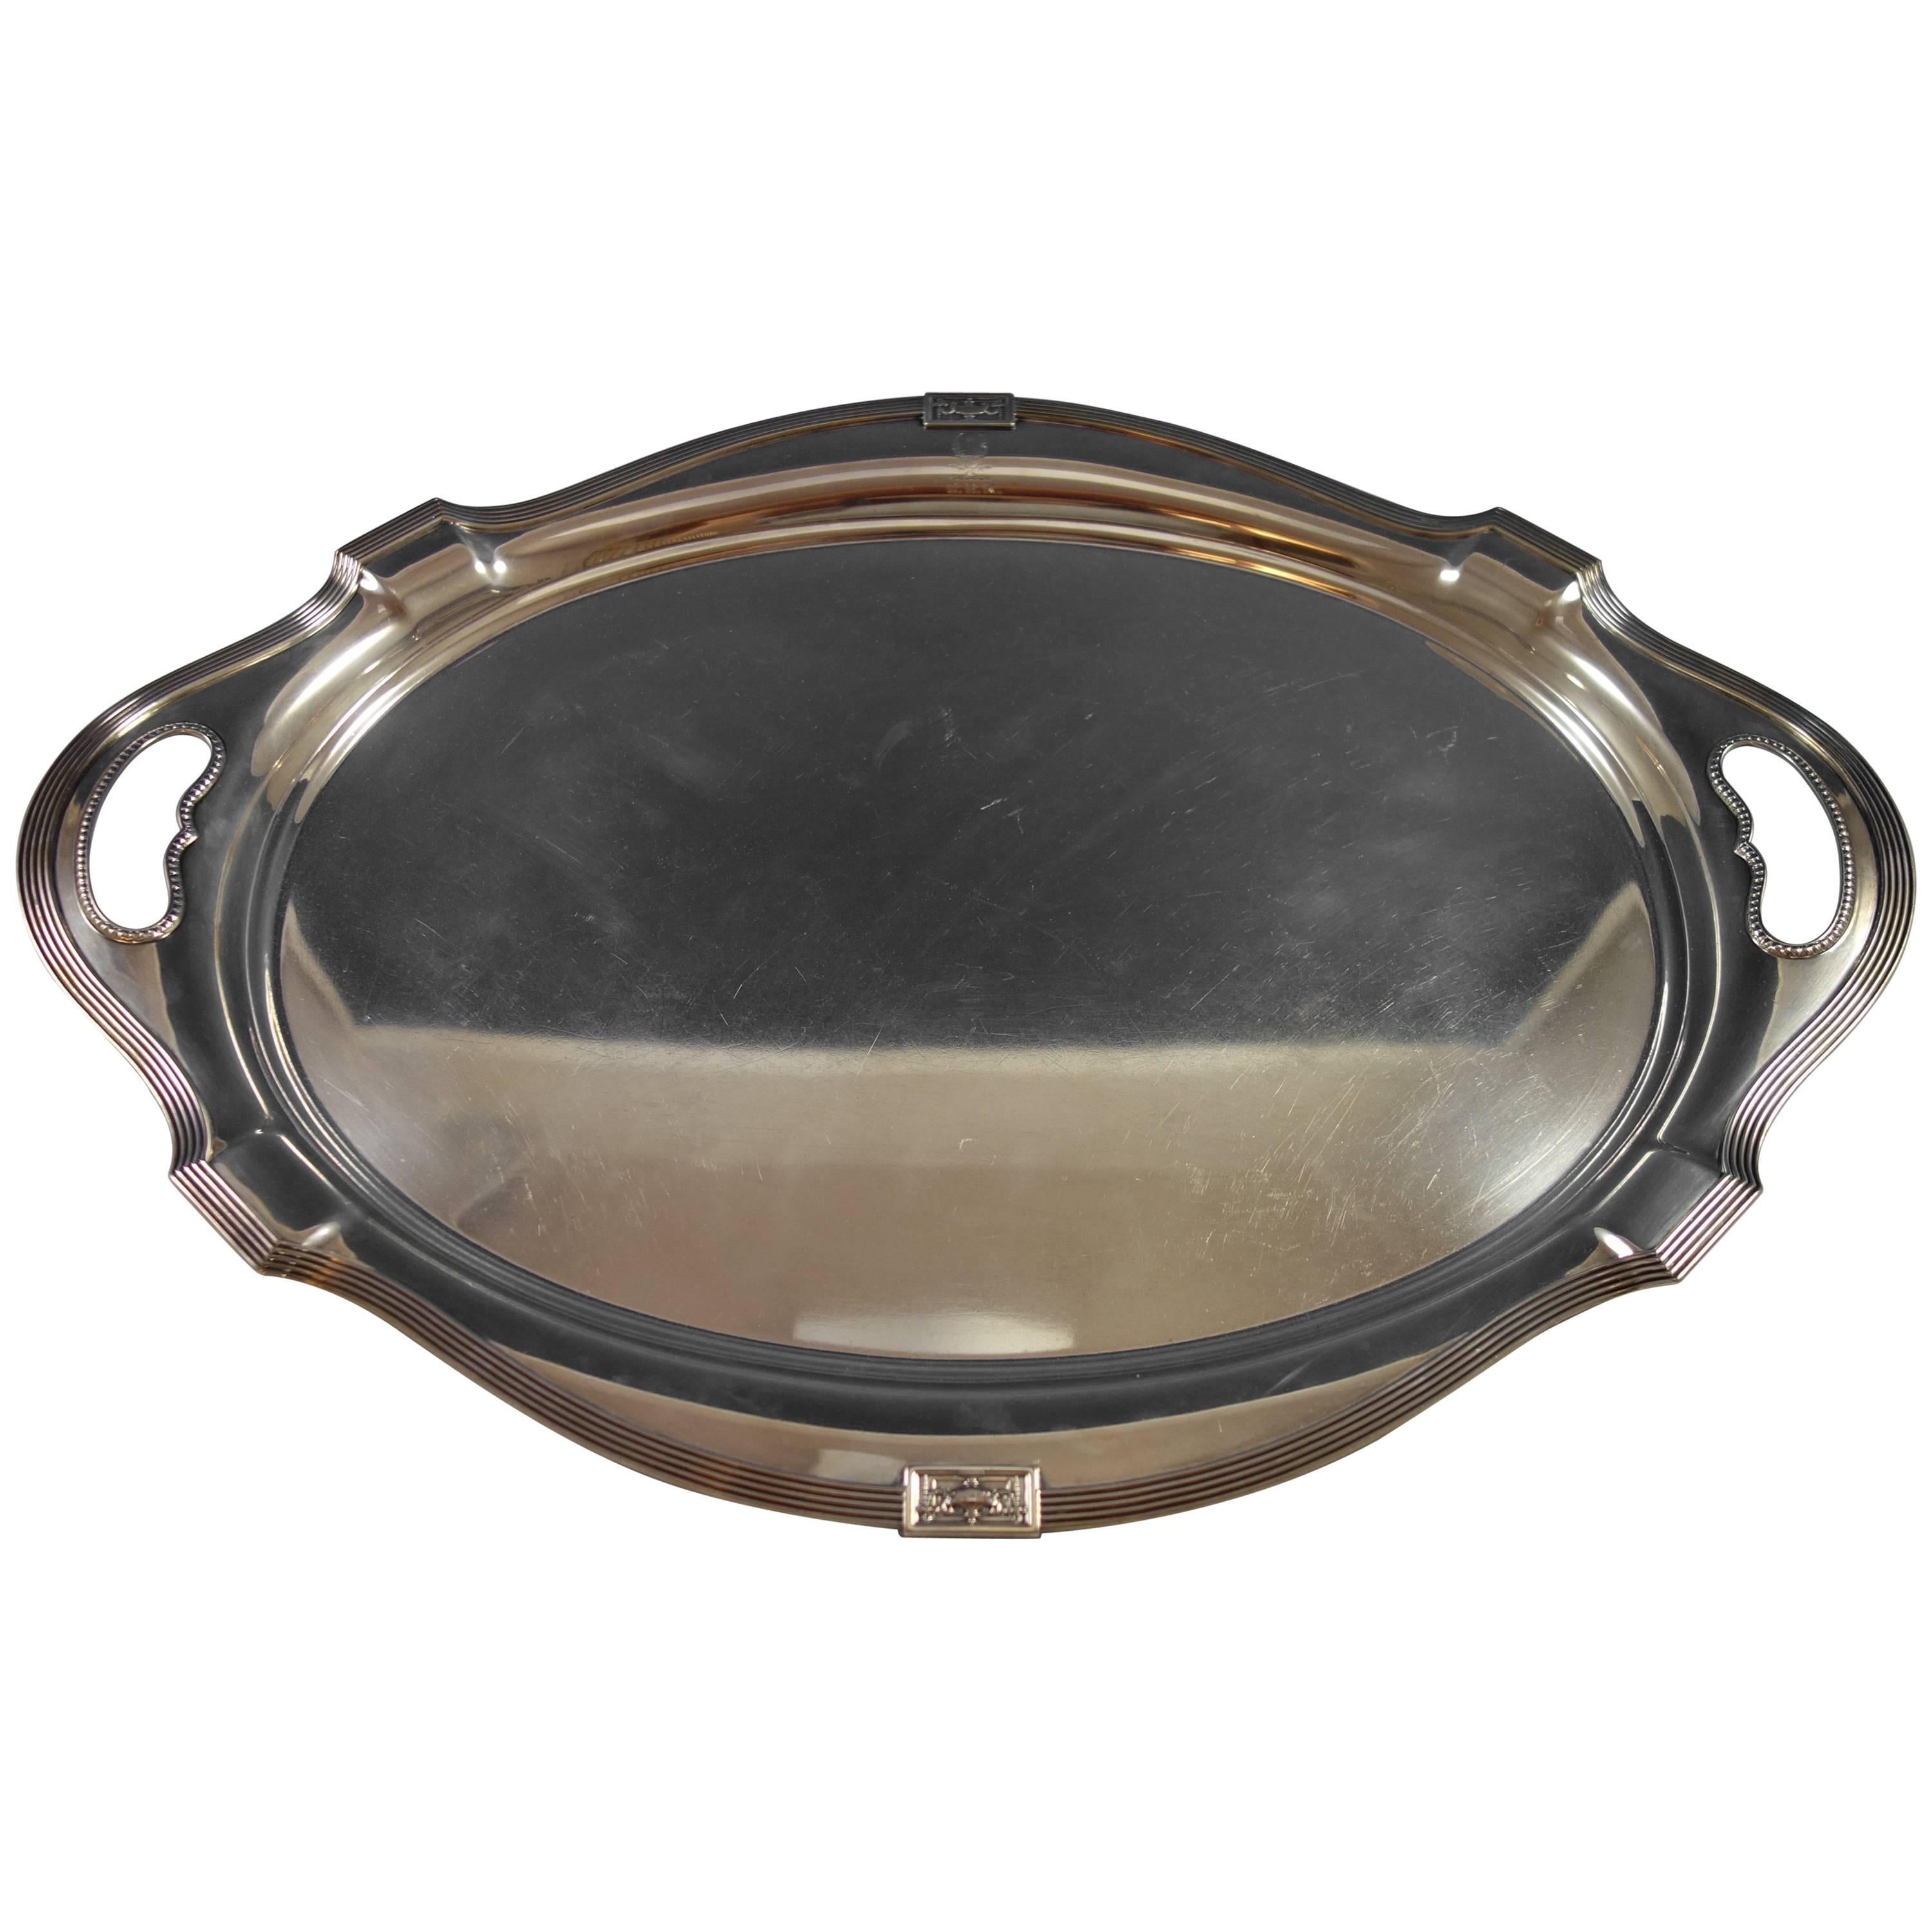 Lansdowne by Gorham Sterling Silver Tea Tray with Eagle Mono #A10736 SKU #1702